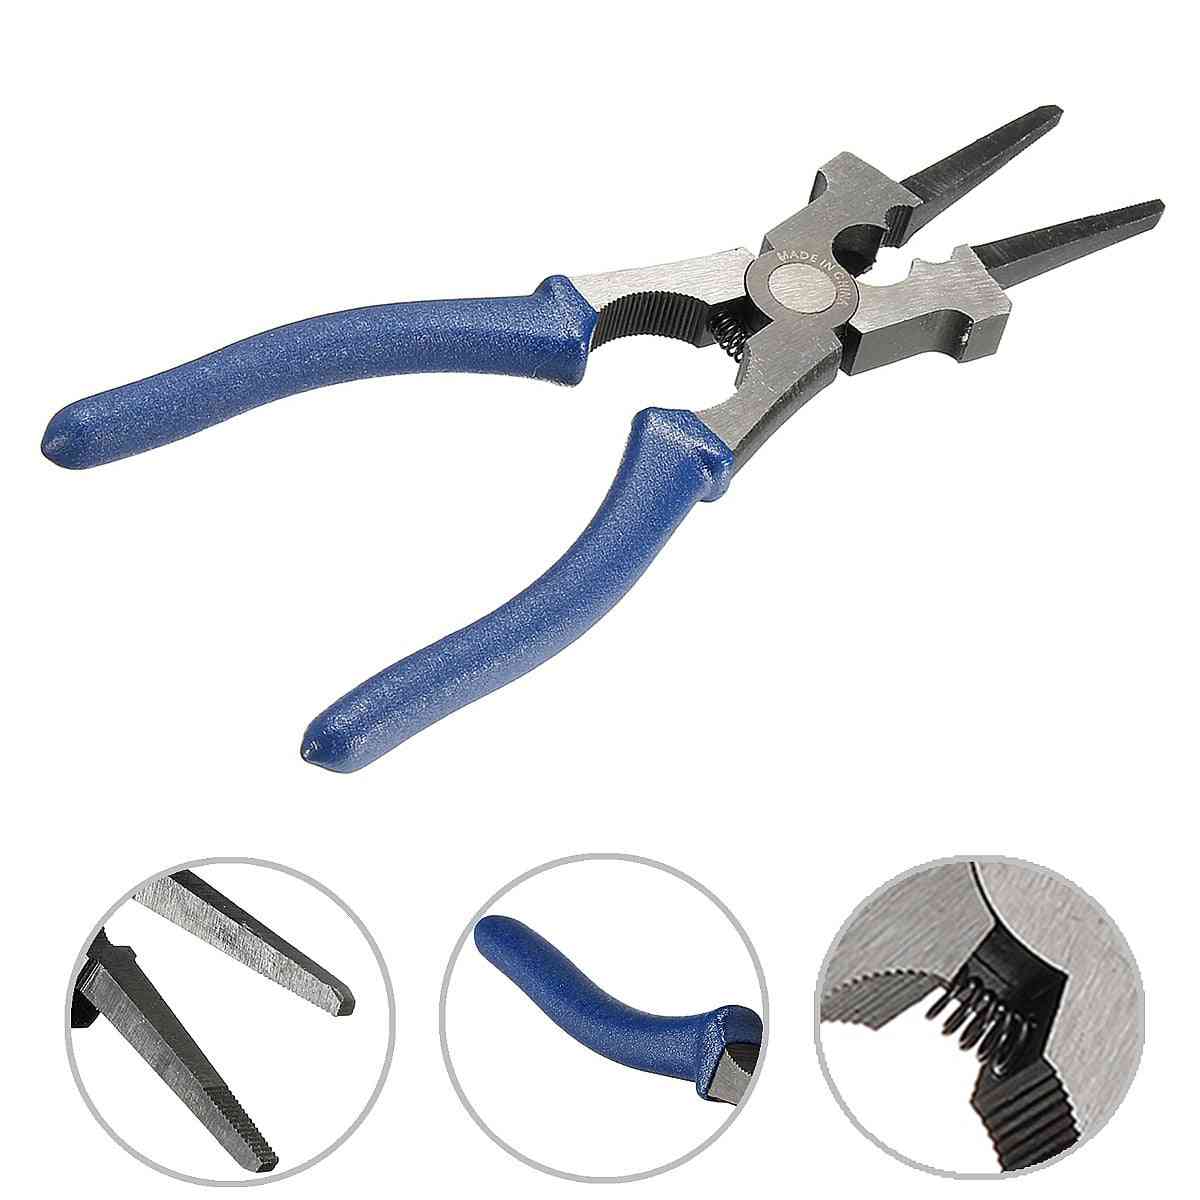 Carbon Steel Flat Mouth Mig Welding Pliers Insulated Handle